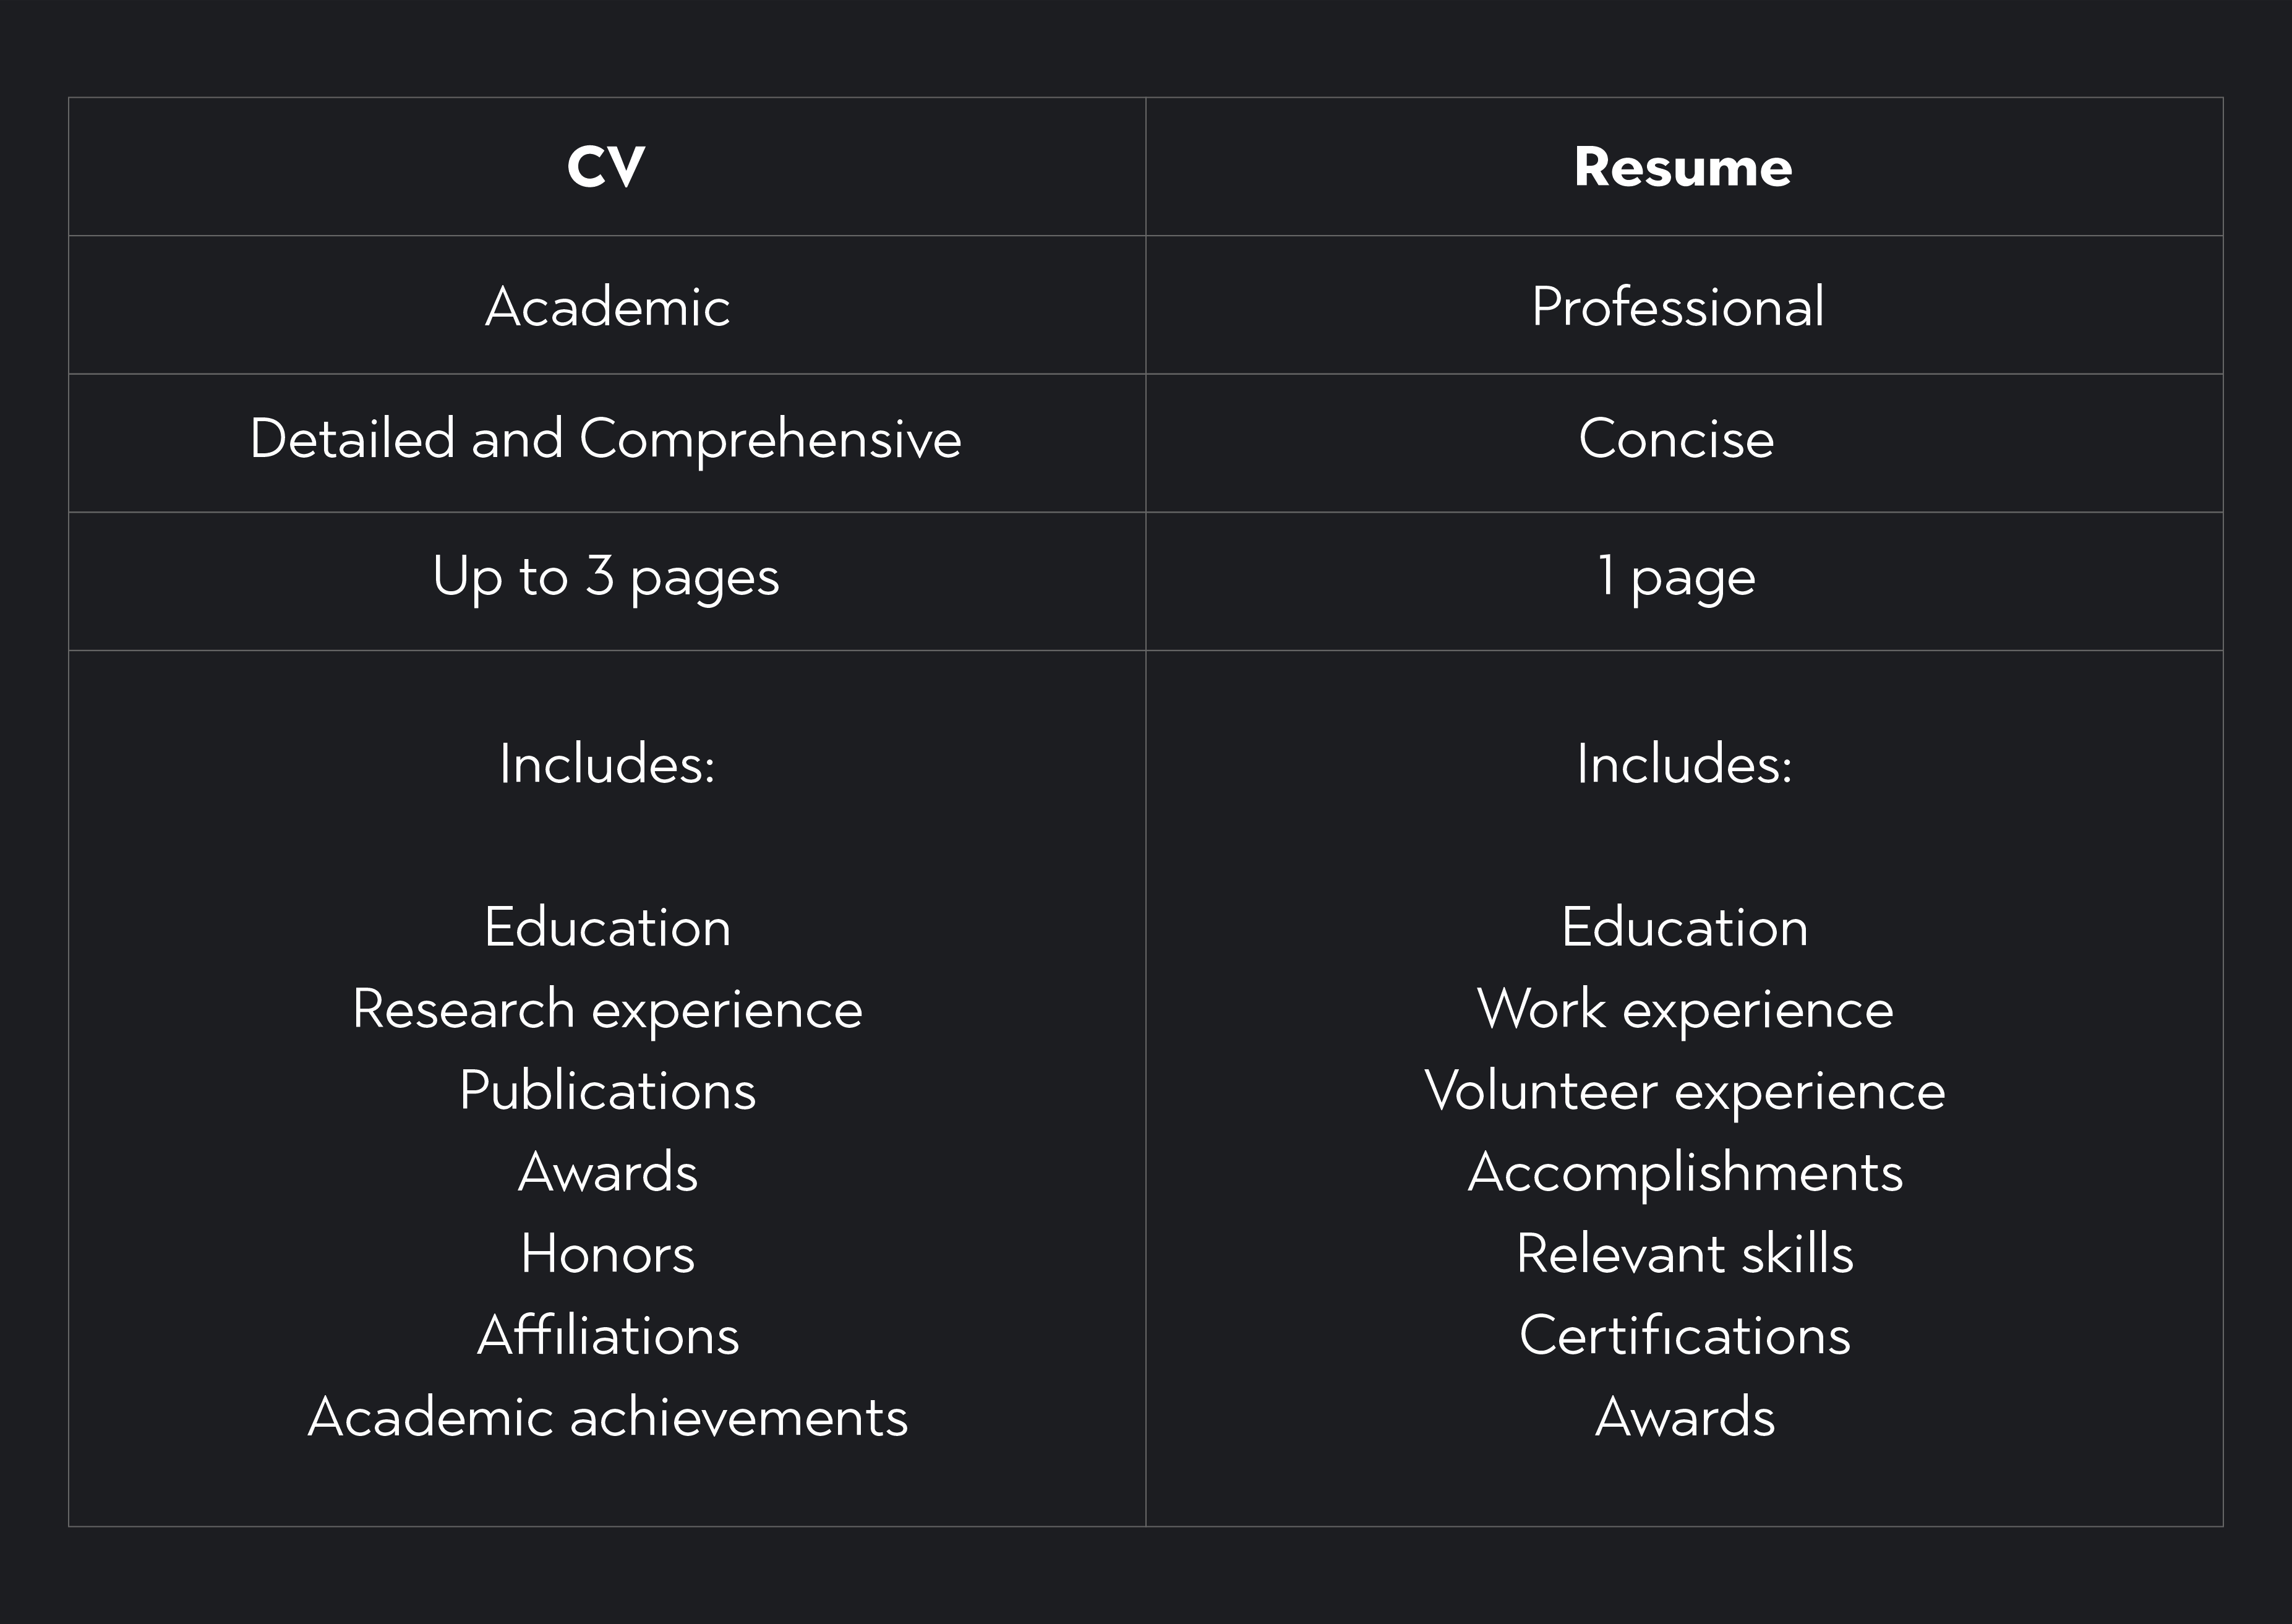 Chart comparing the differences between a Student CV and a Resume